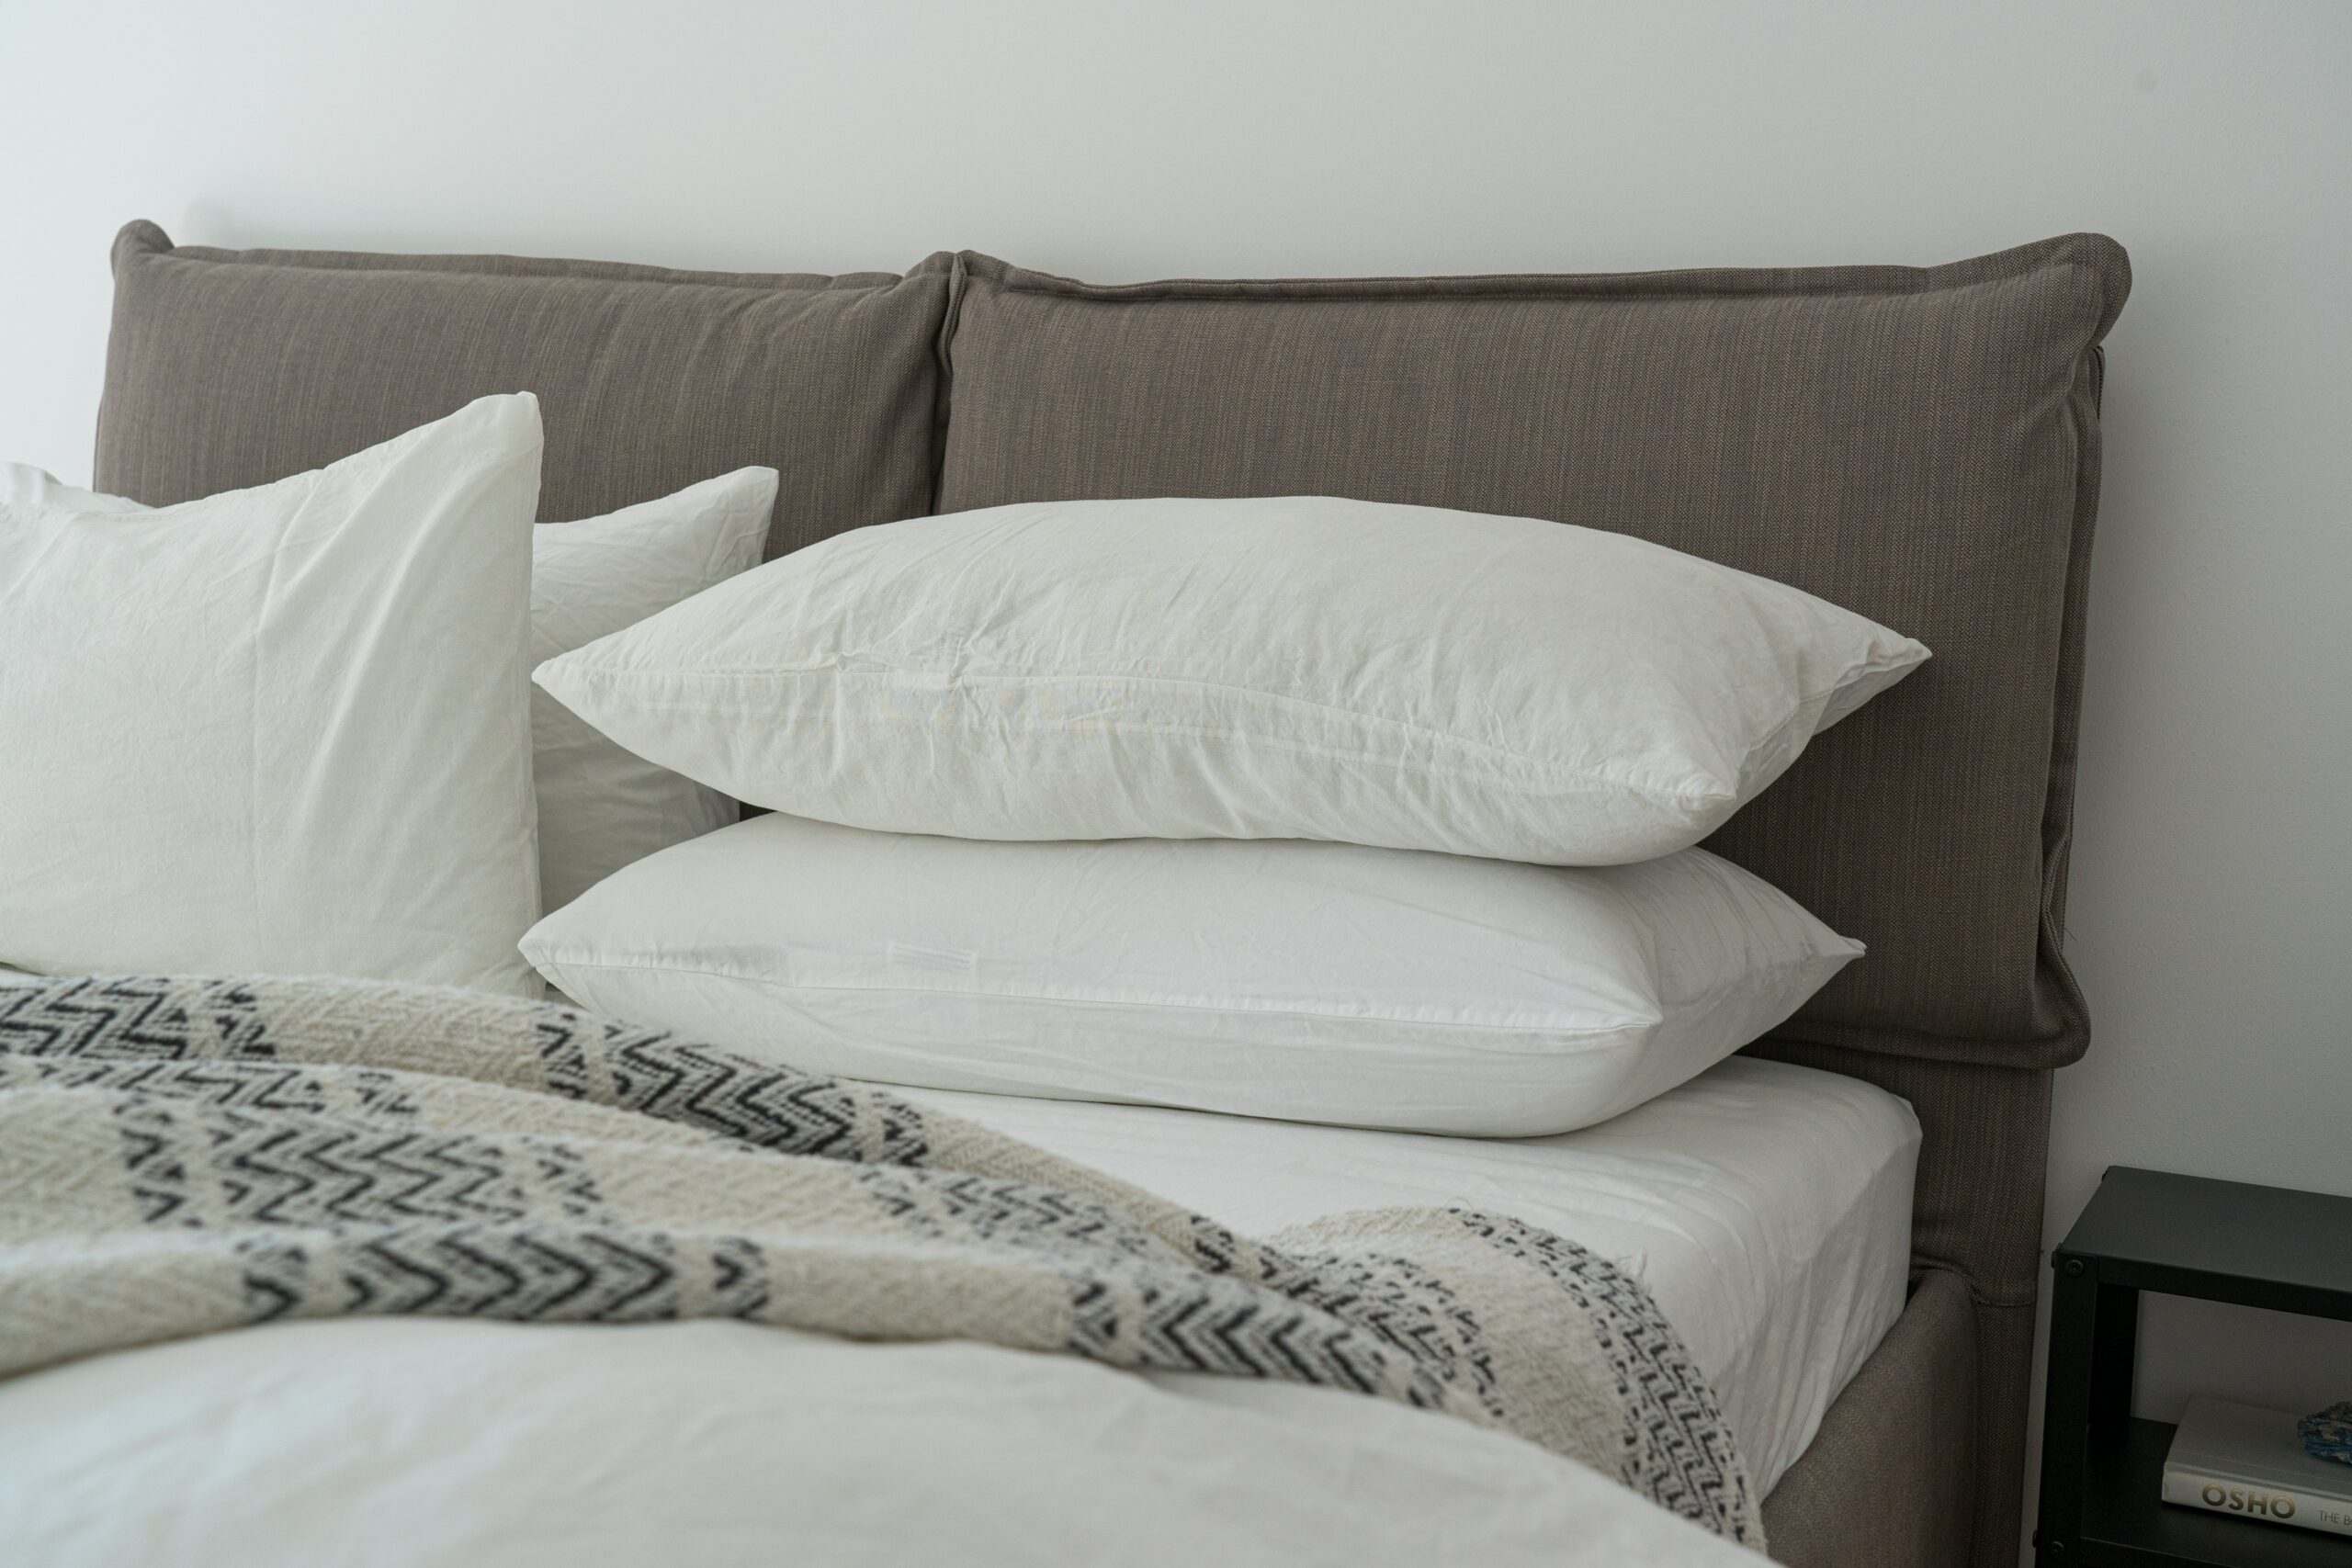 How Much Should You Spend on a Good Pillow?